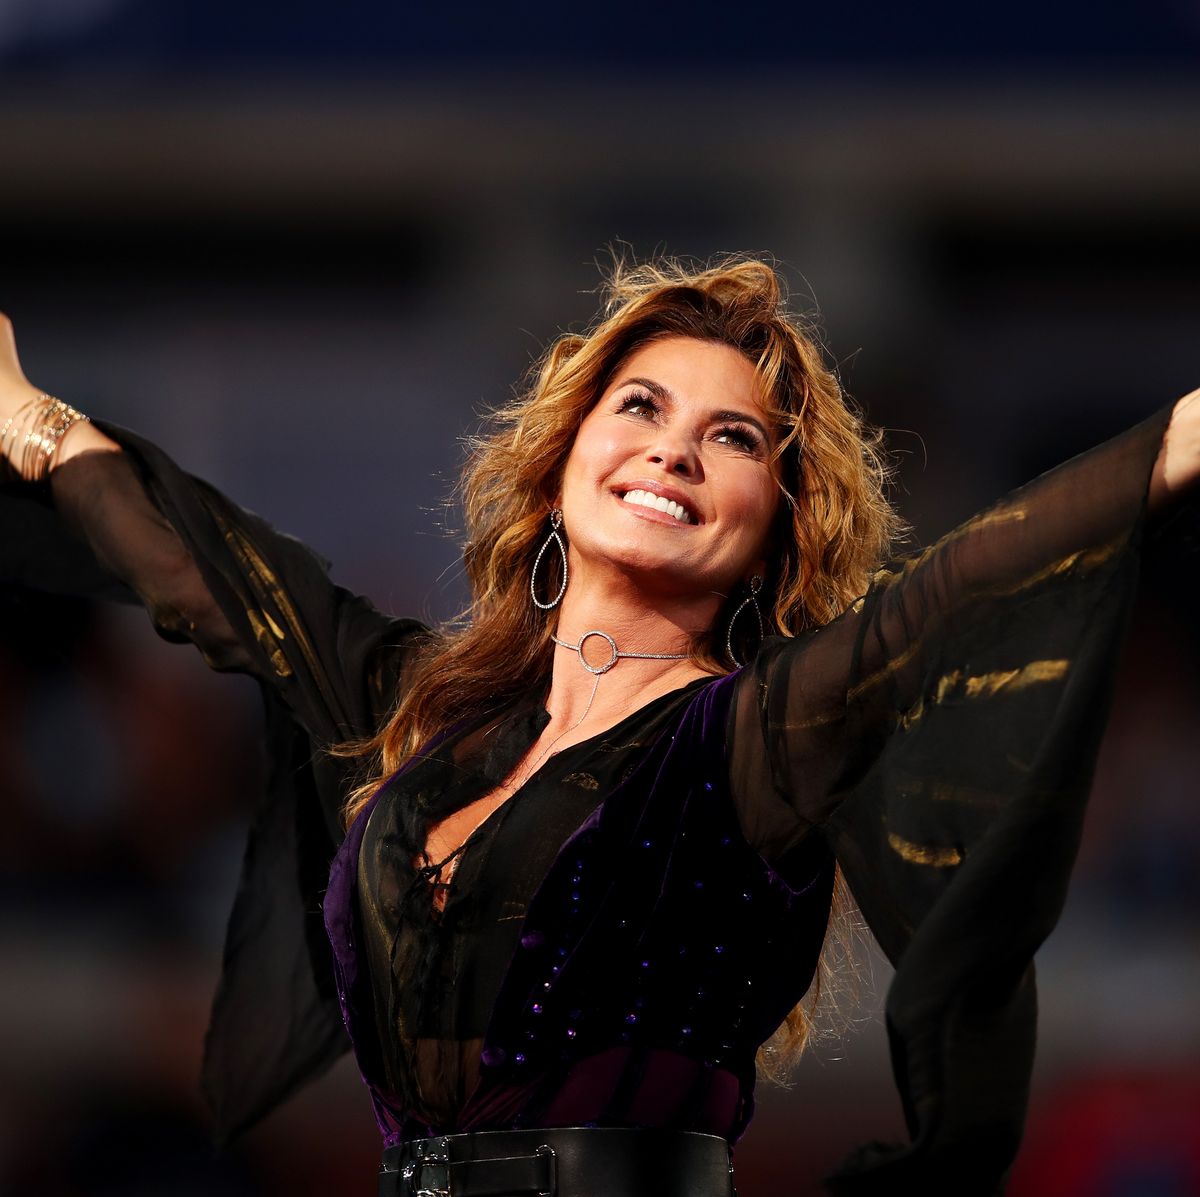 Shania Twain: Biography, Country Singer, Songs, Age & Albums